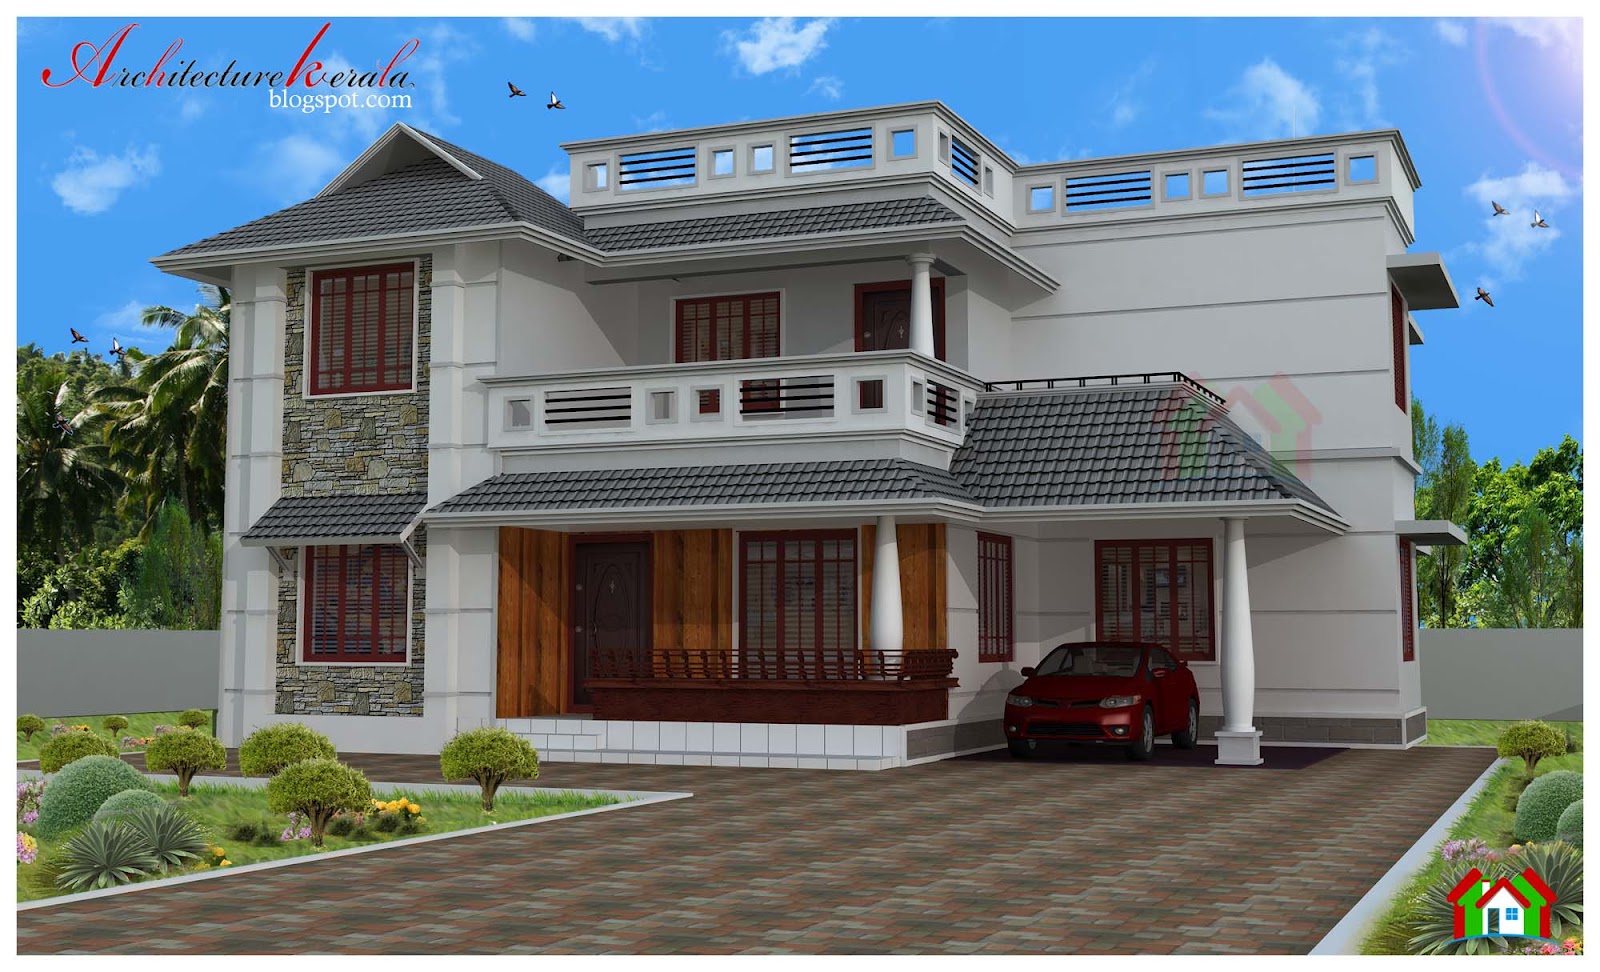  FOUR  BED ROOM  HOUSE  PLAN  ARCHITECTURE  KERALA 